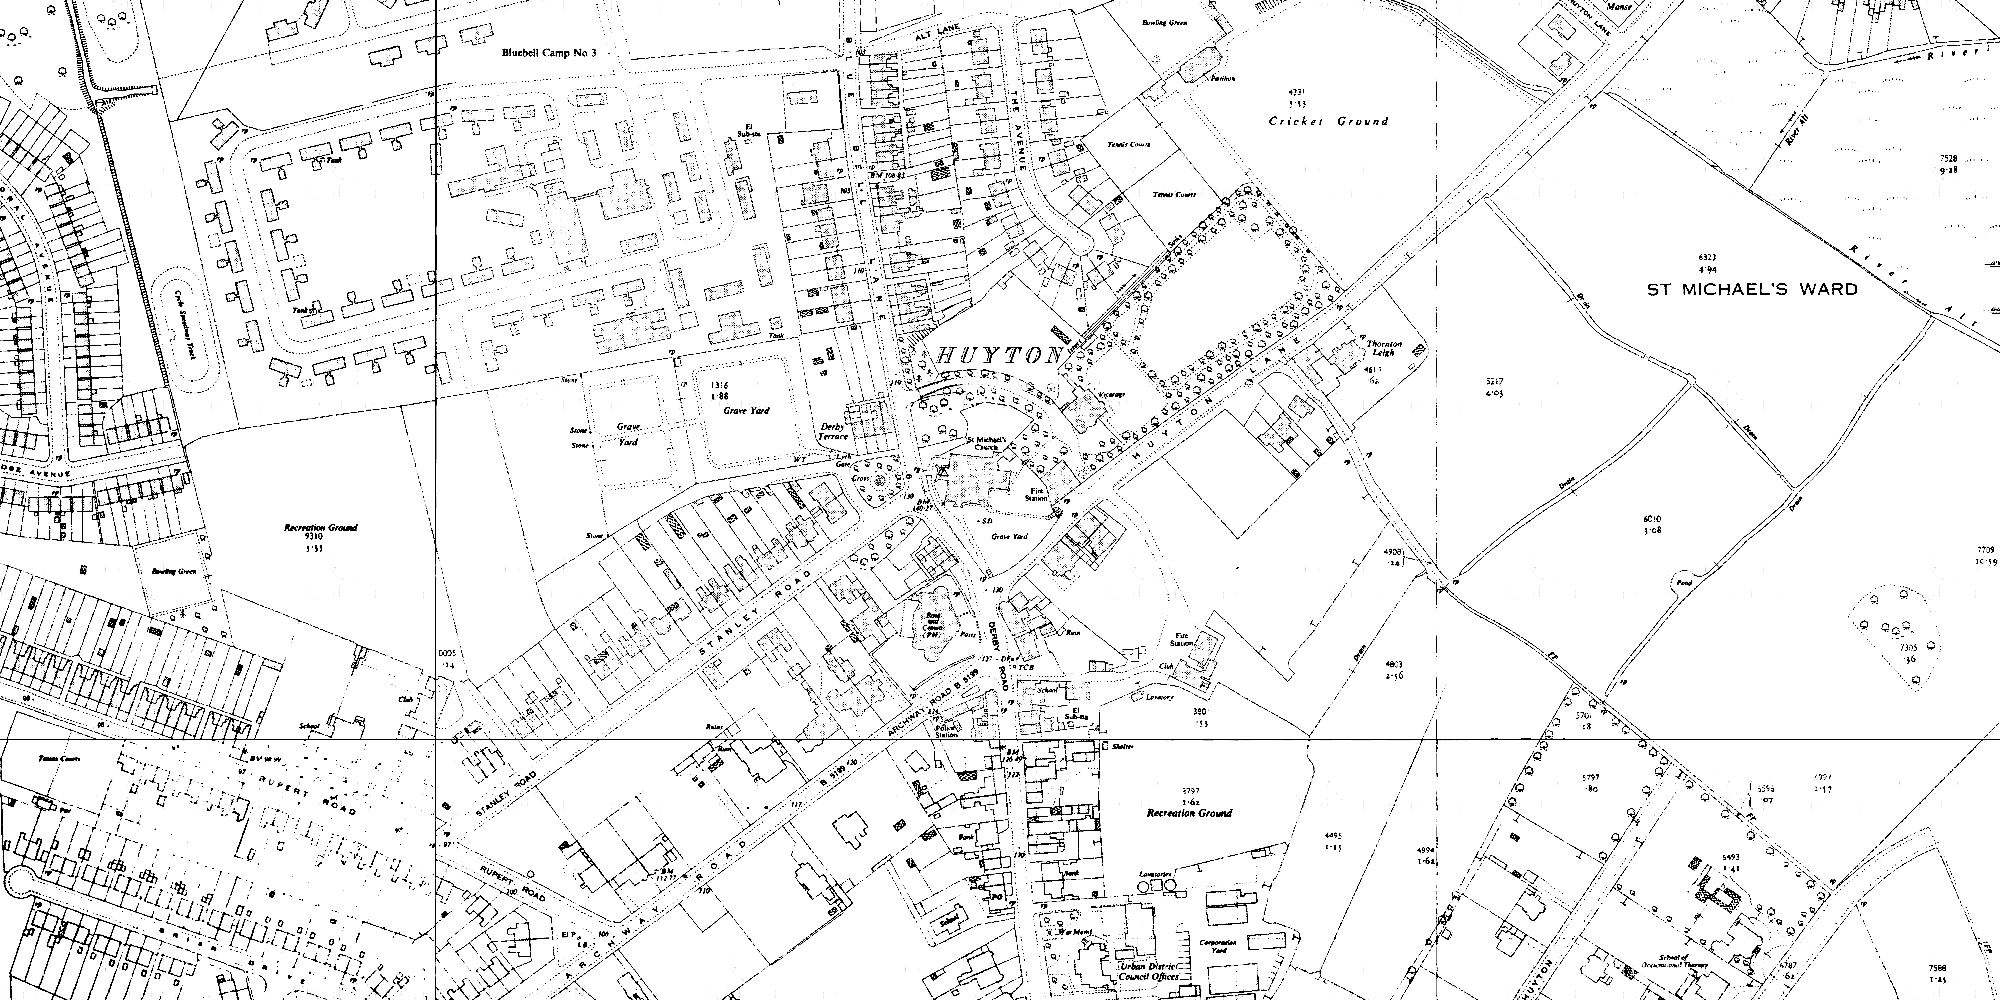 OS map of Huyton, 1955-6 (1:2500)